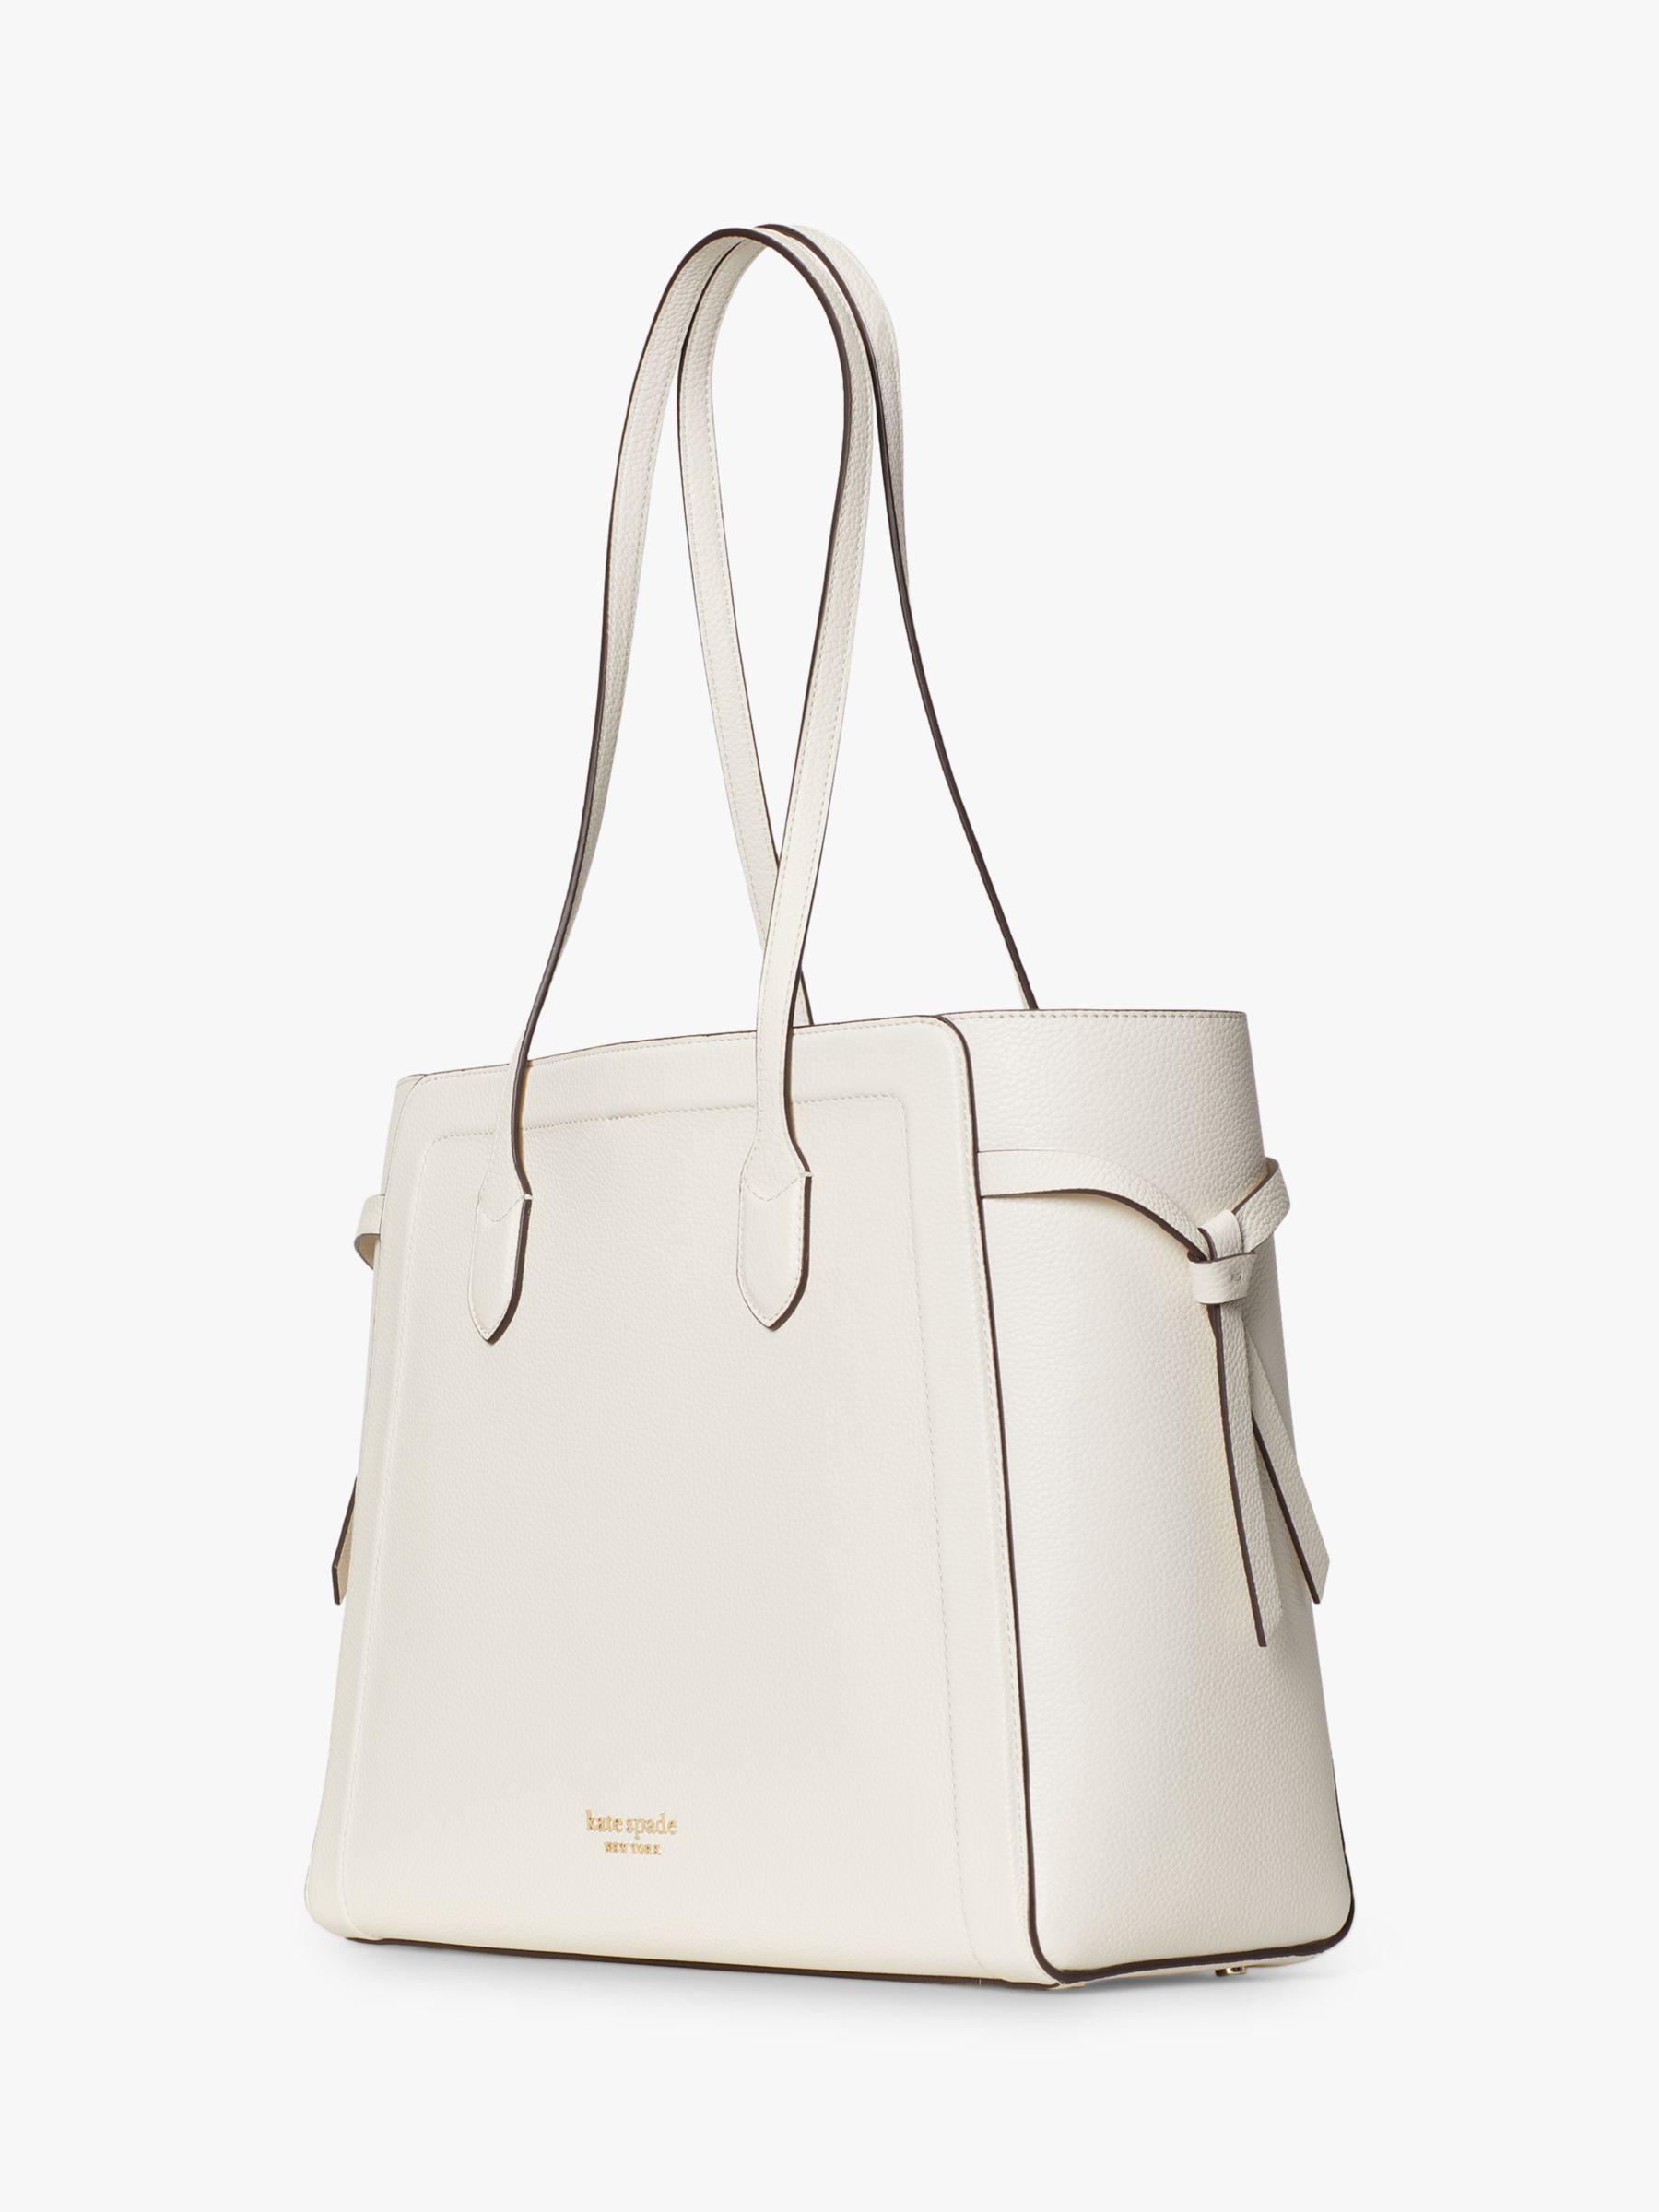 kate spade new york Knott Large Leather Tote Bag, Parchment at John ...